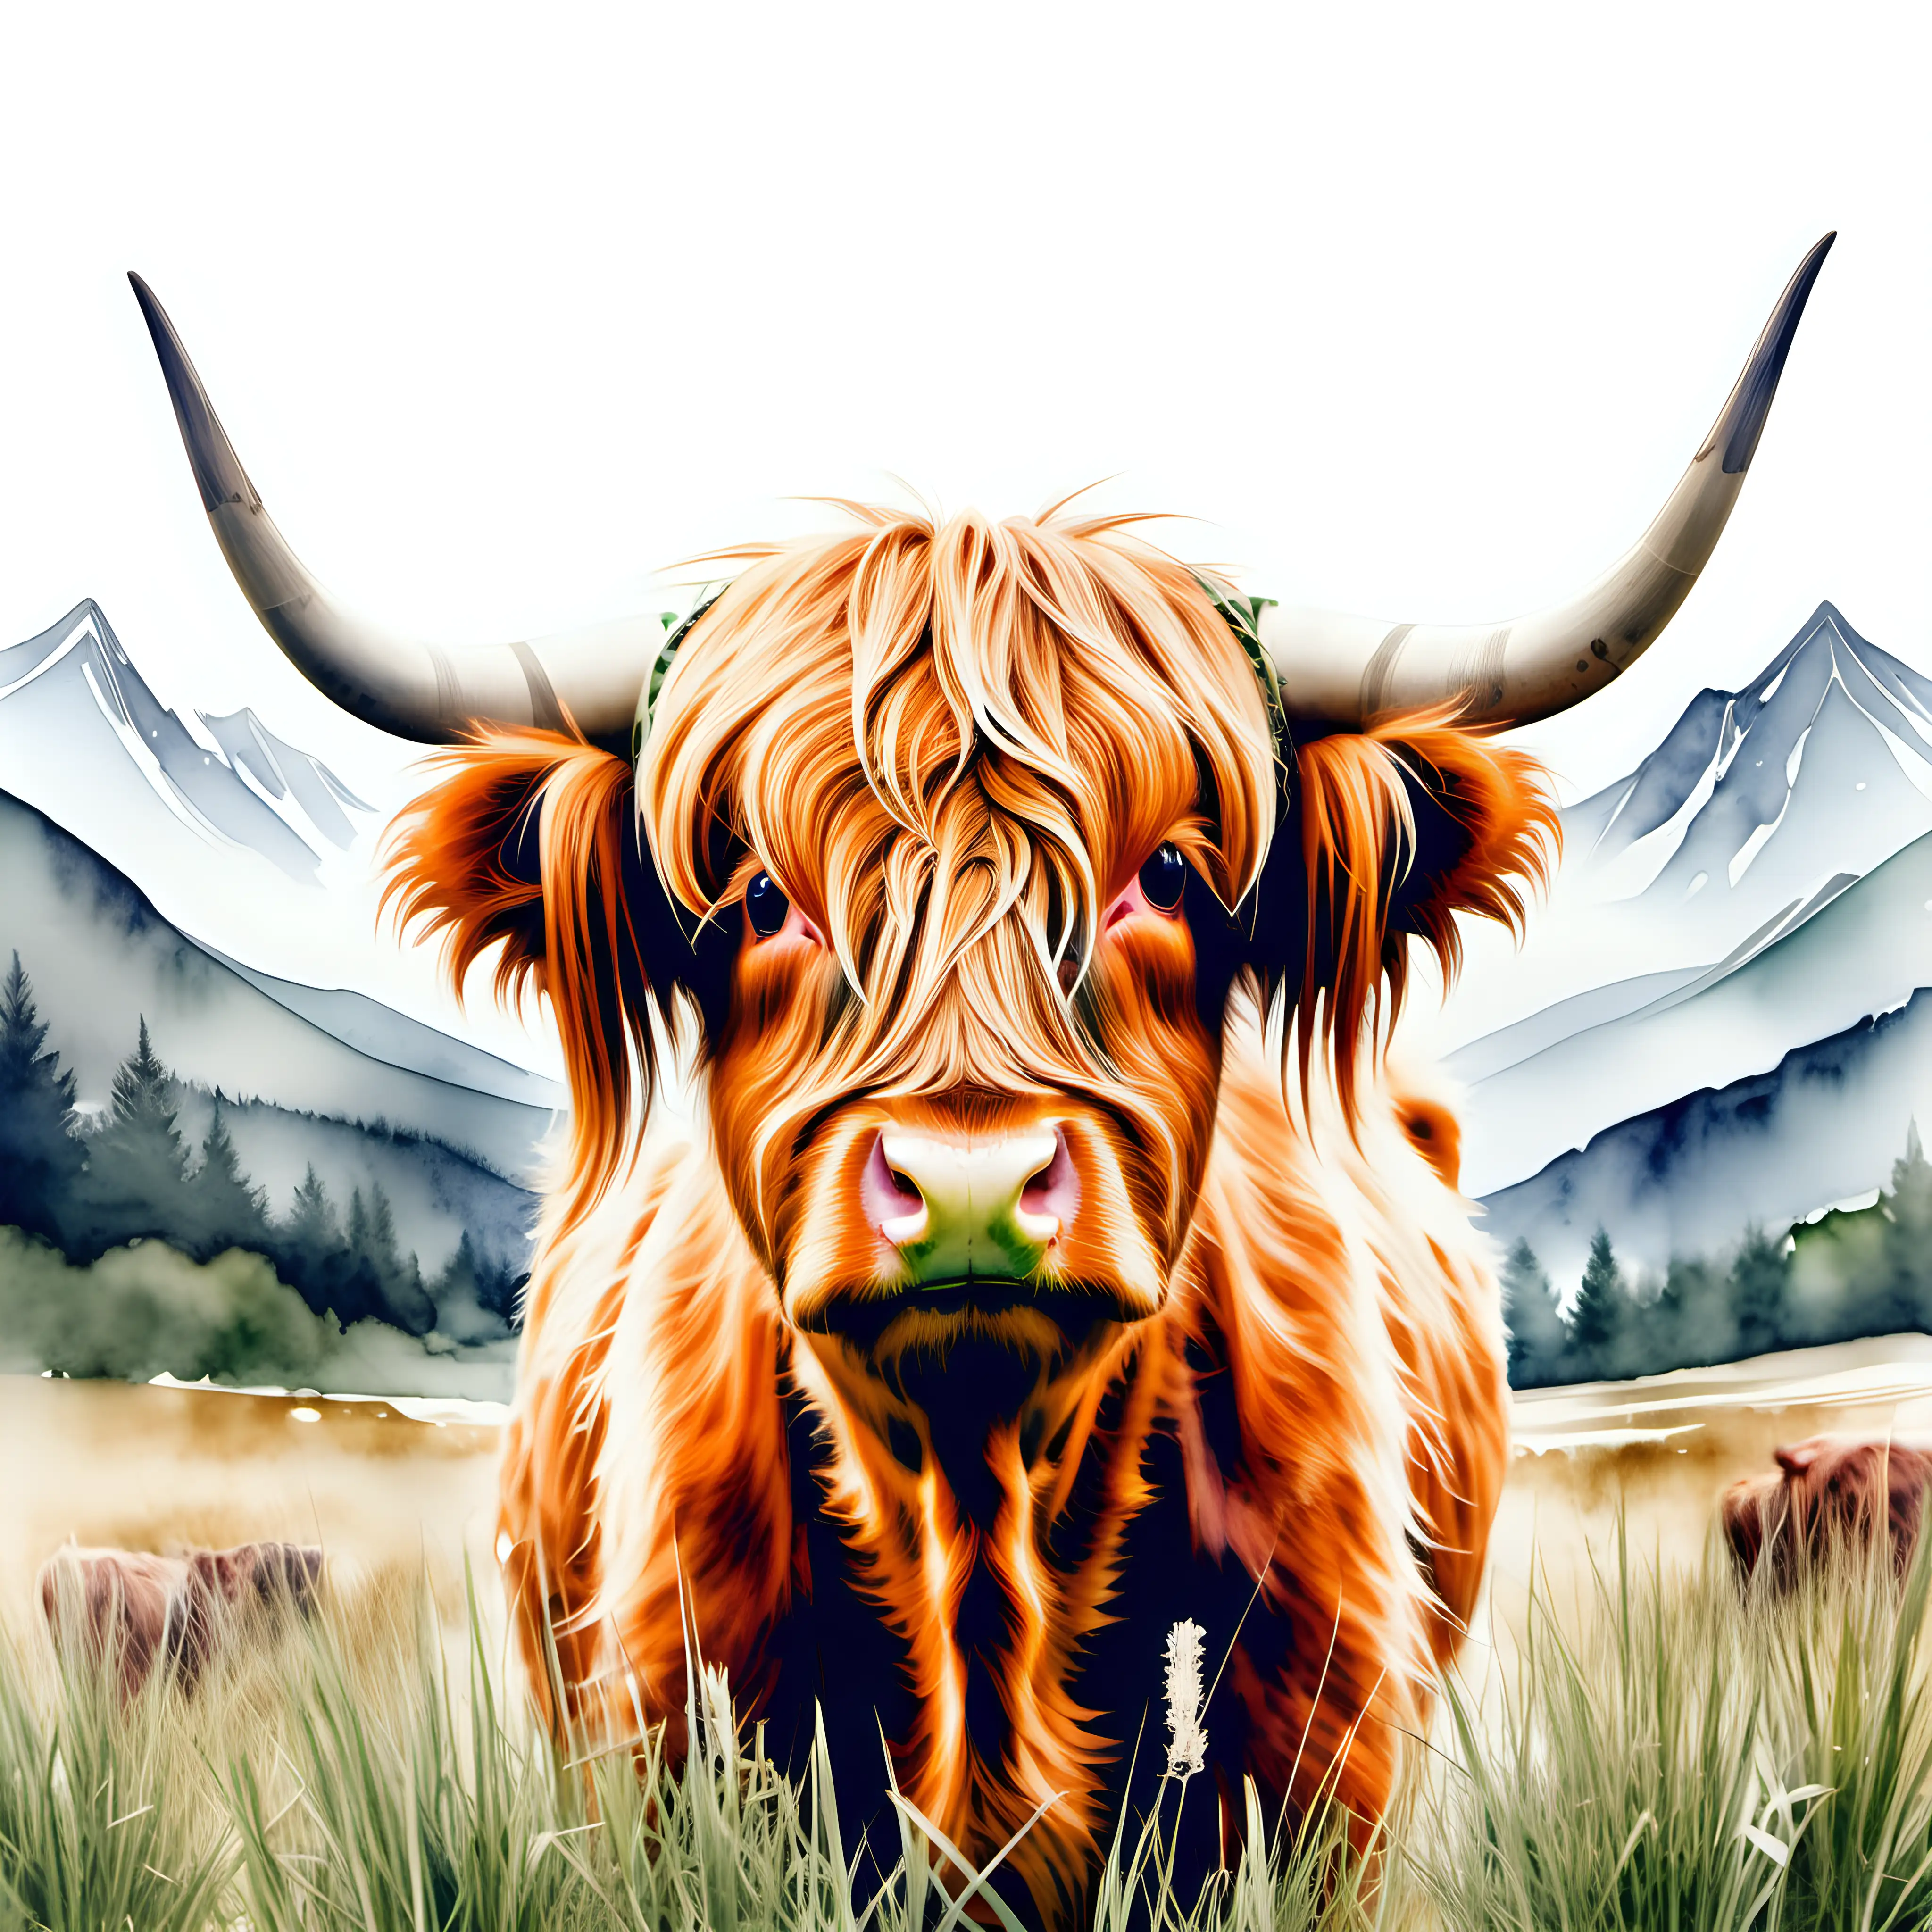 Majestic Highland Cow Grazing in Boho Watercolor Style